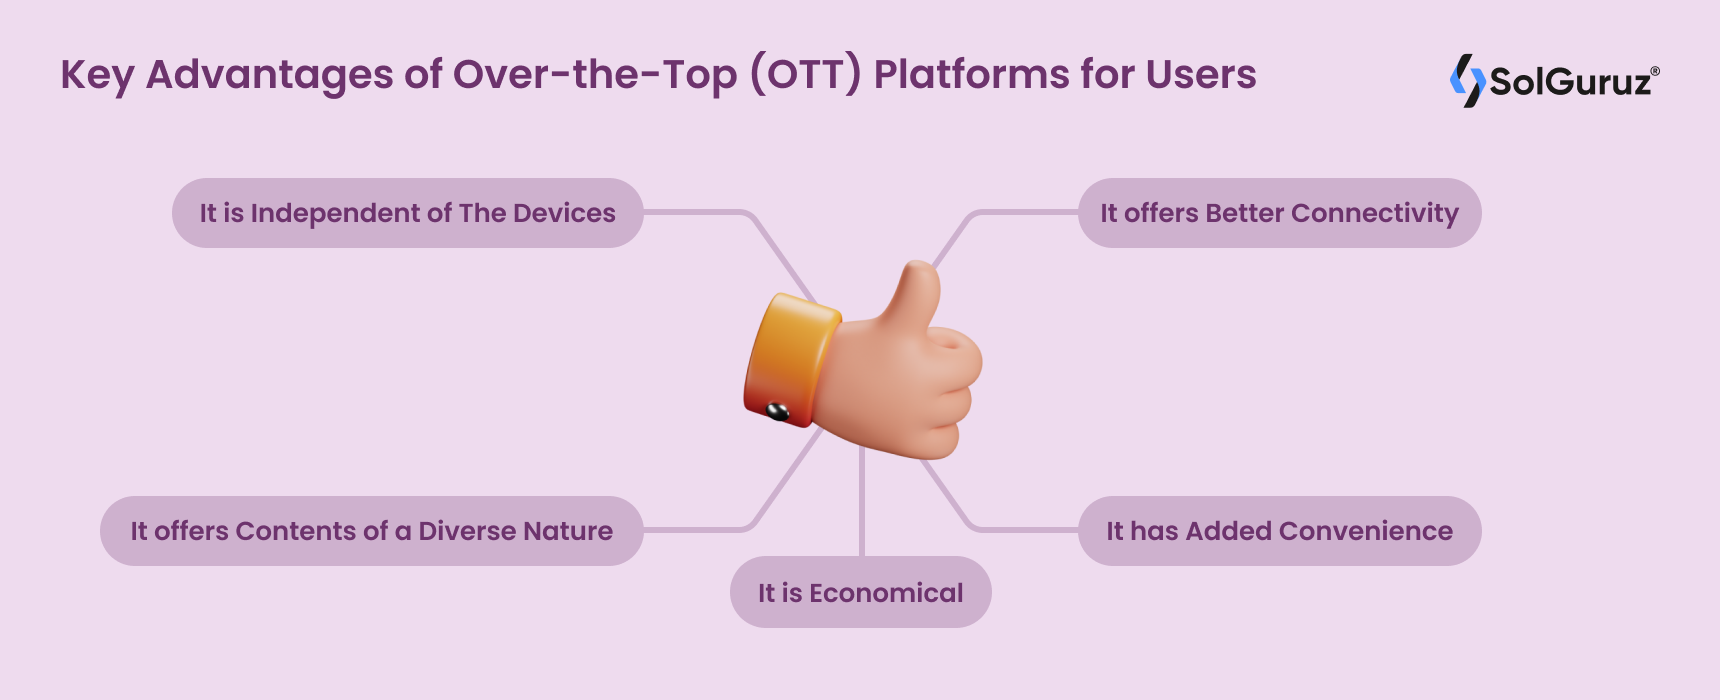 Key Advantages of Over-the-Top (OTT) Platforms for Users